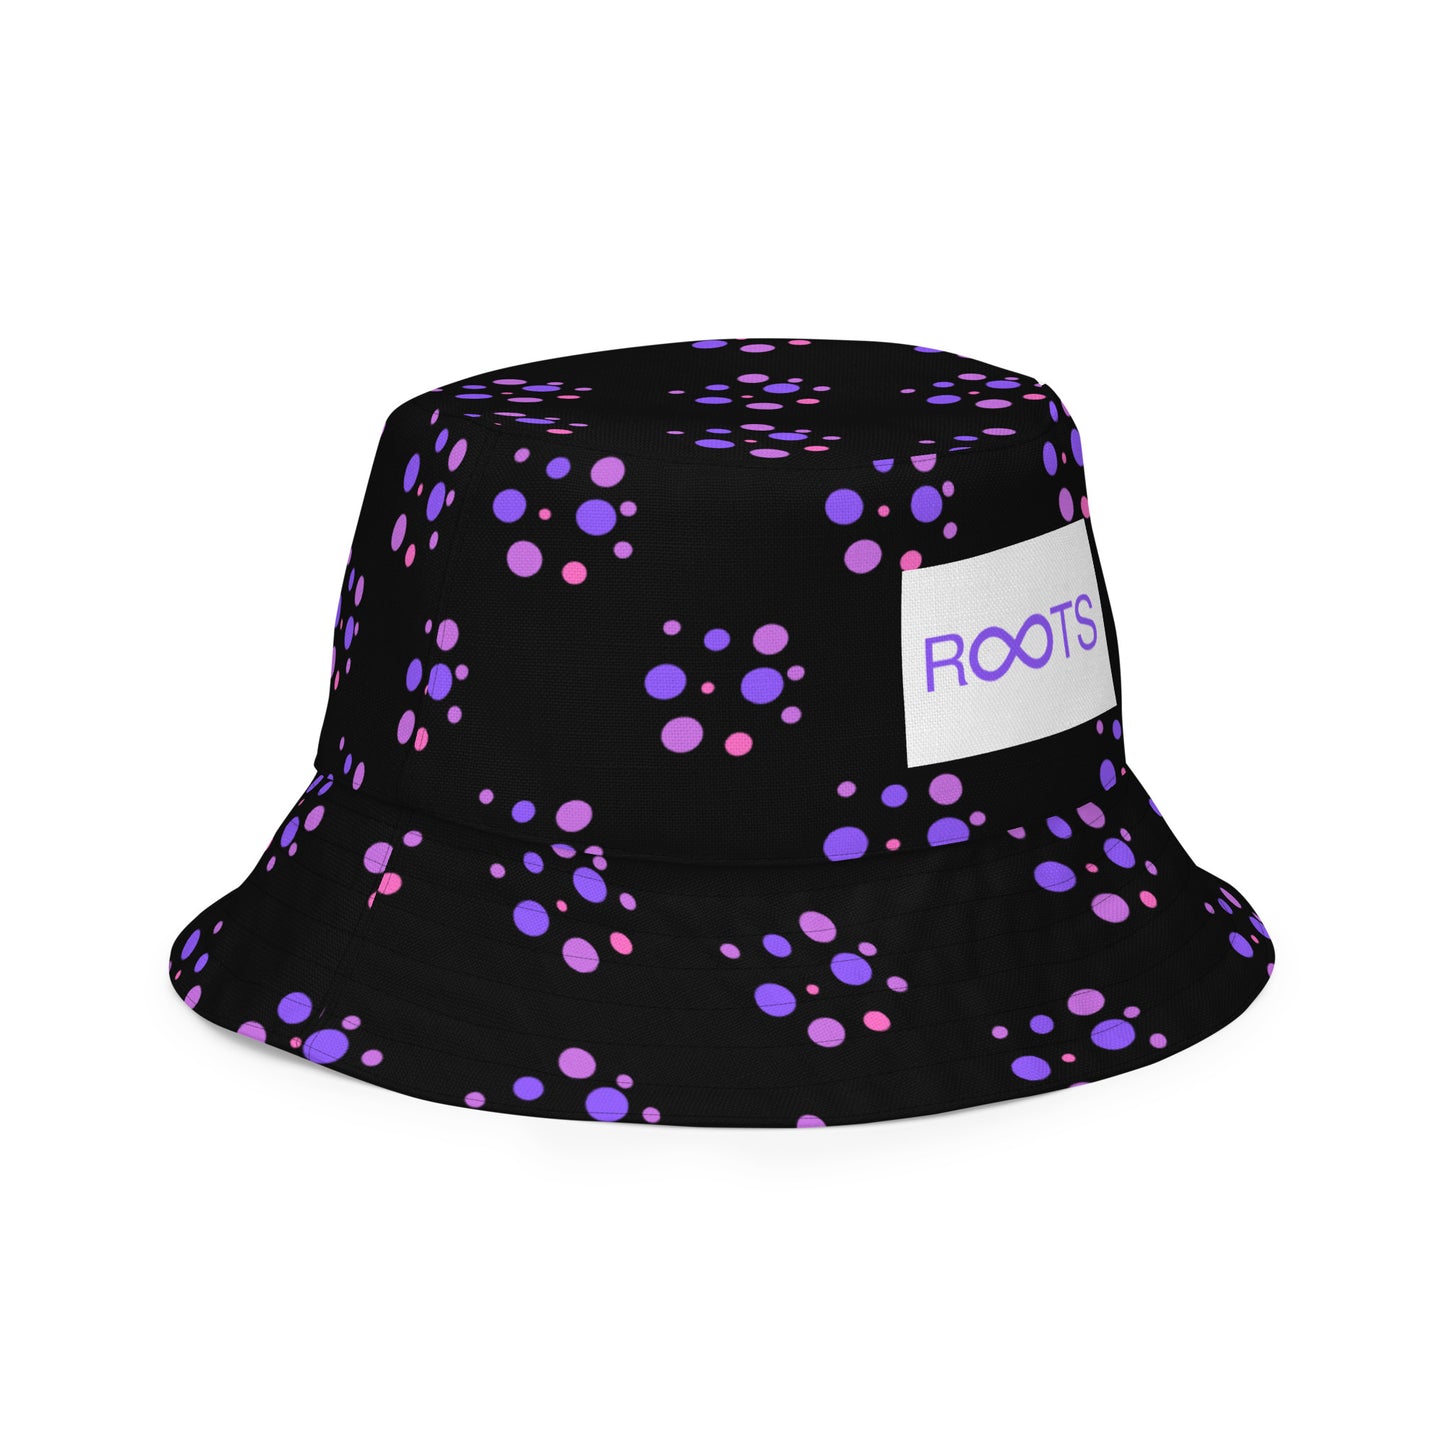 Roots Are Forever Reversible bucket hat